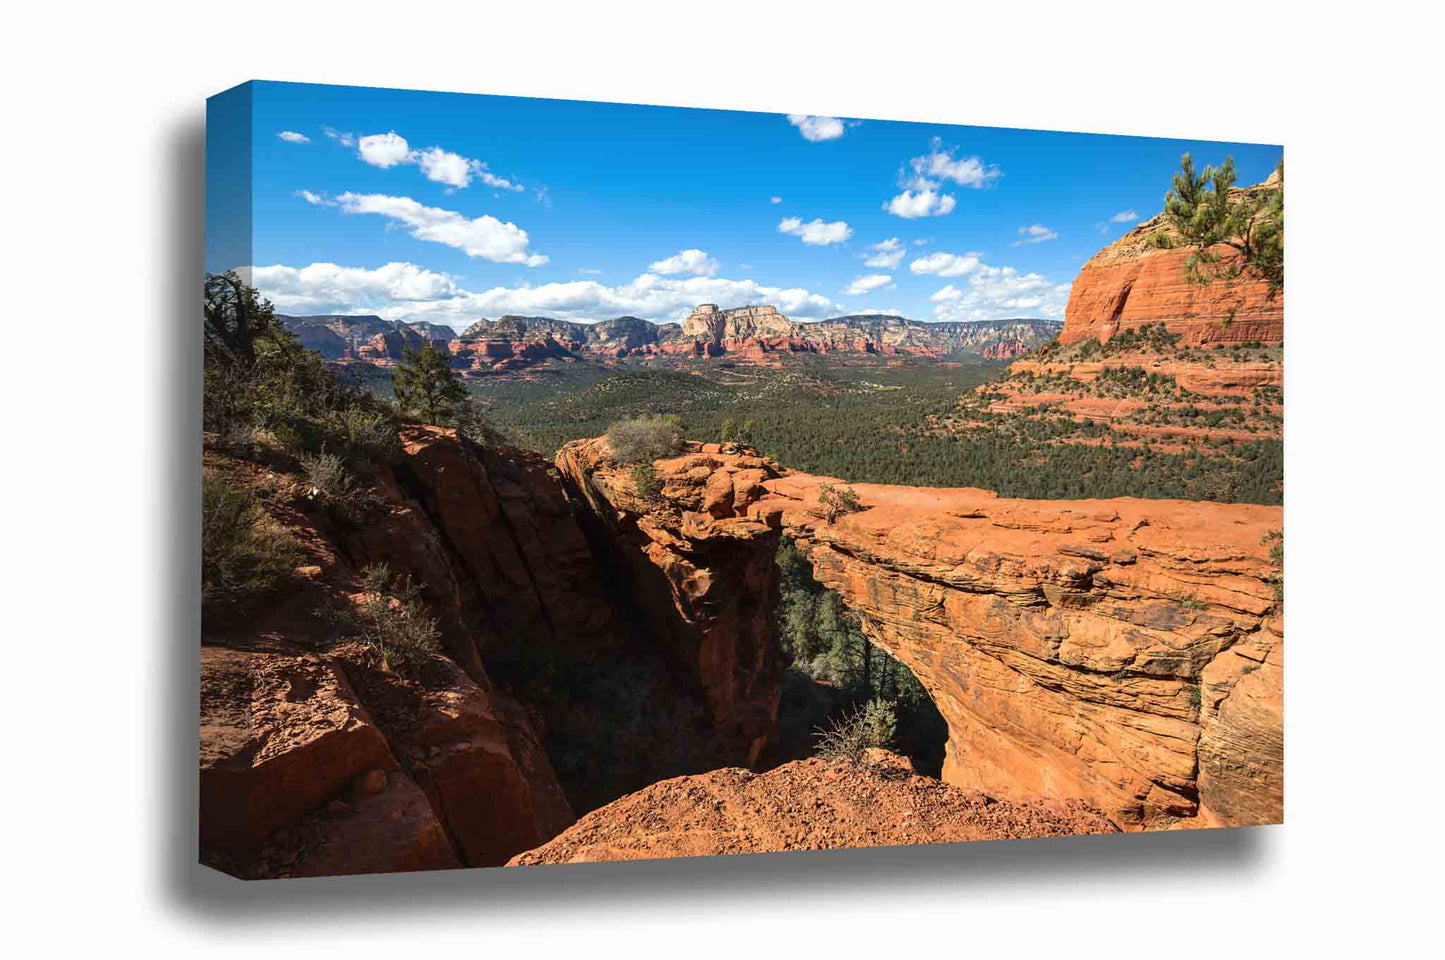 Desert southwest canvas wall art of Devil's Bridge and surrounding landscape on a spring day near Sedona, Arizona by Sean Ramsey of Southern Plains Photography.